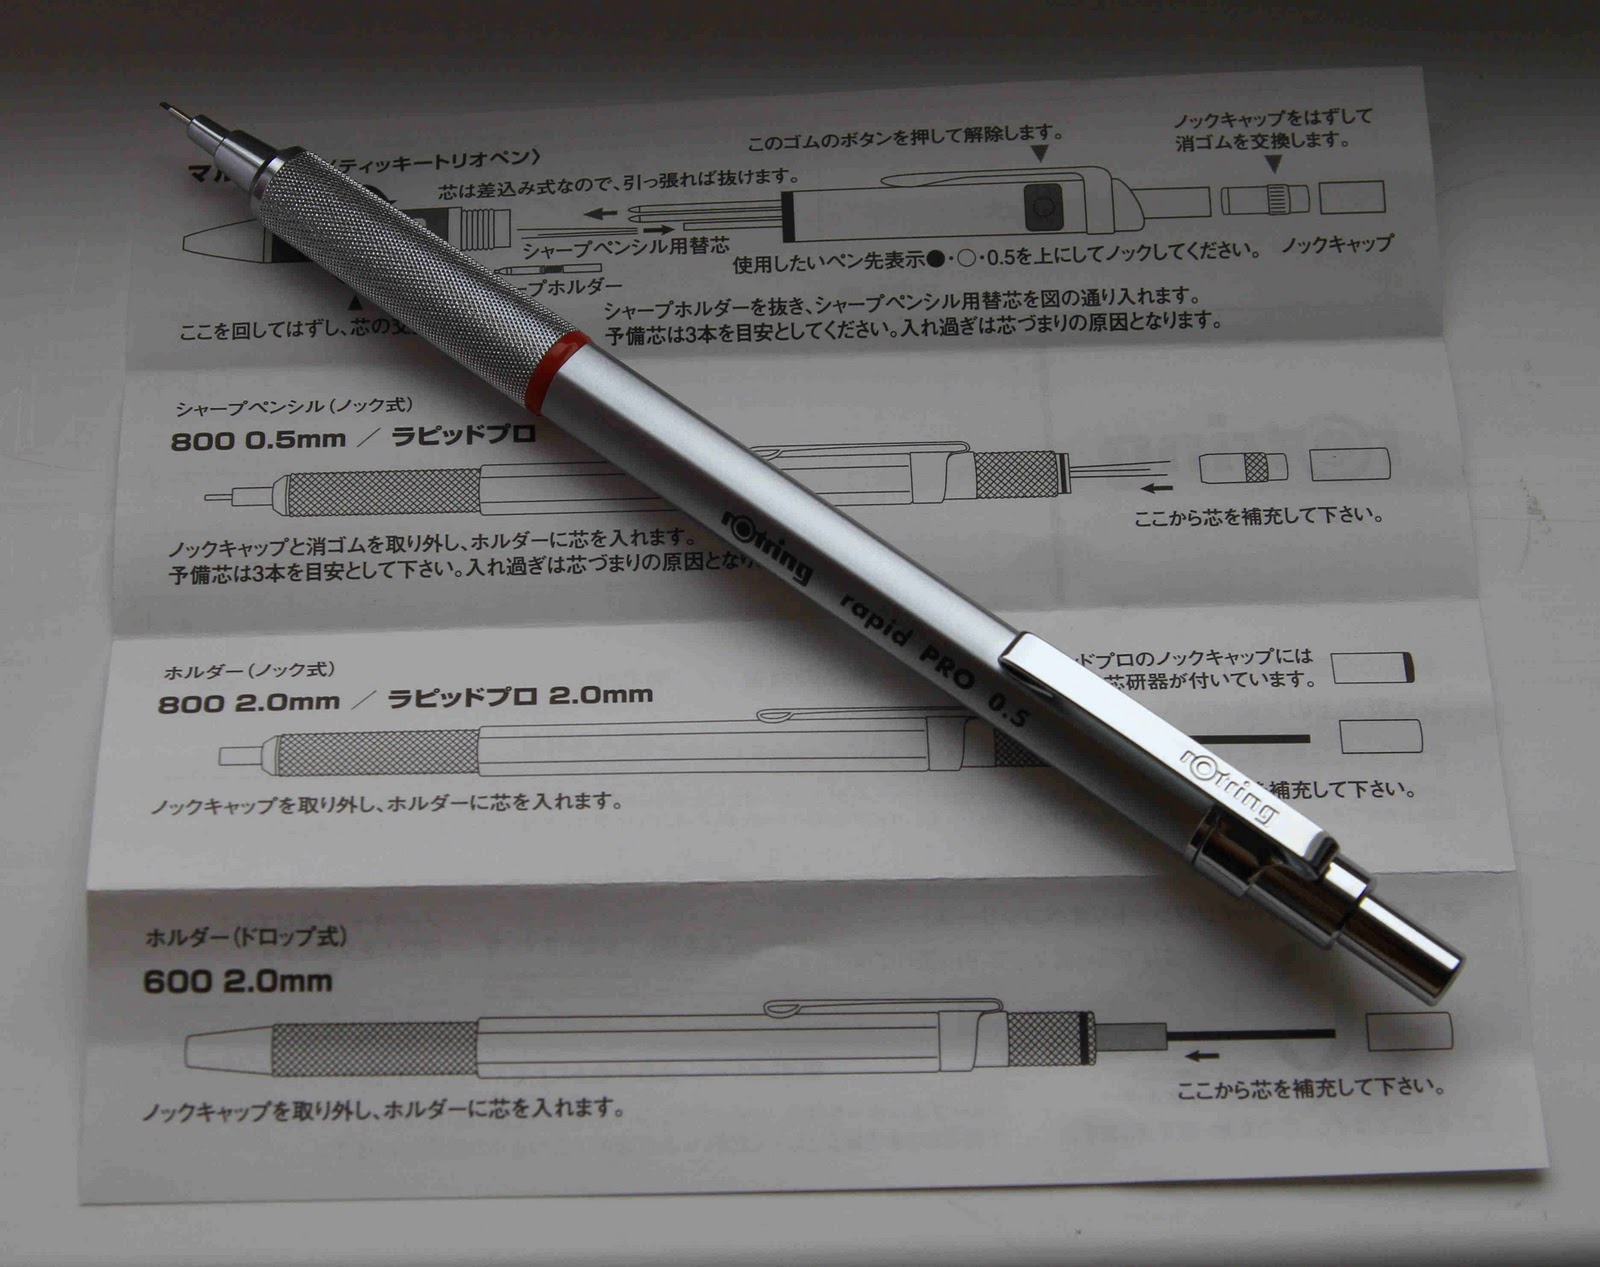 Review: Rotring Rapid Pro Mechanical Pencil